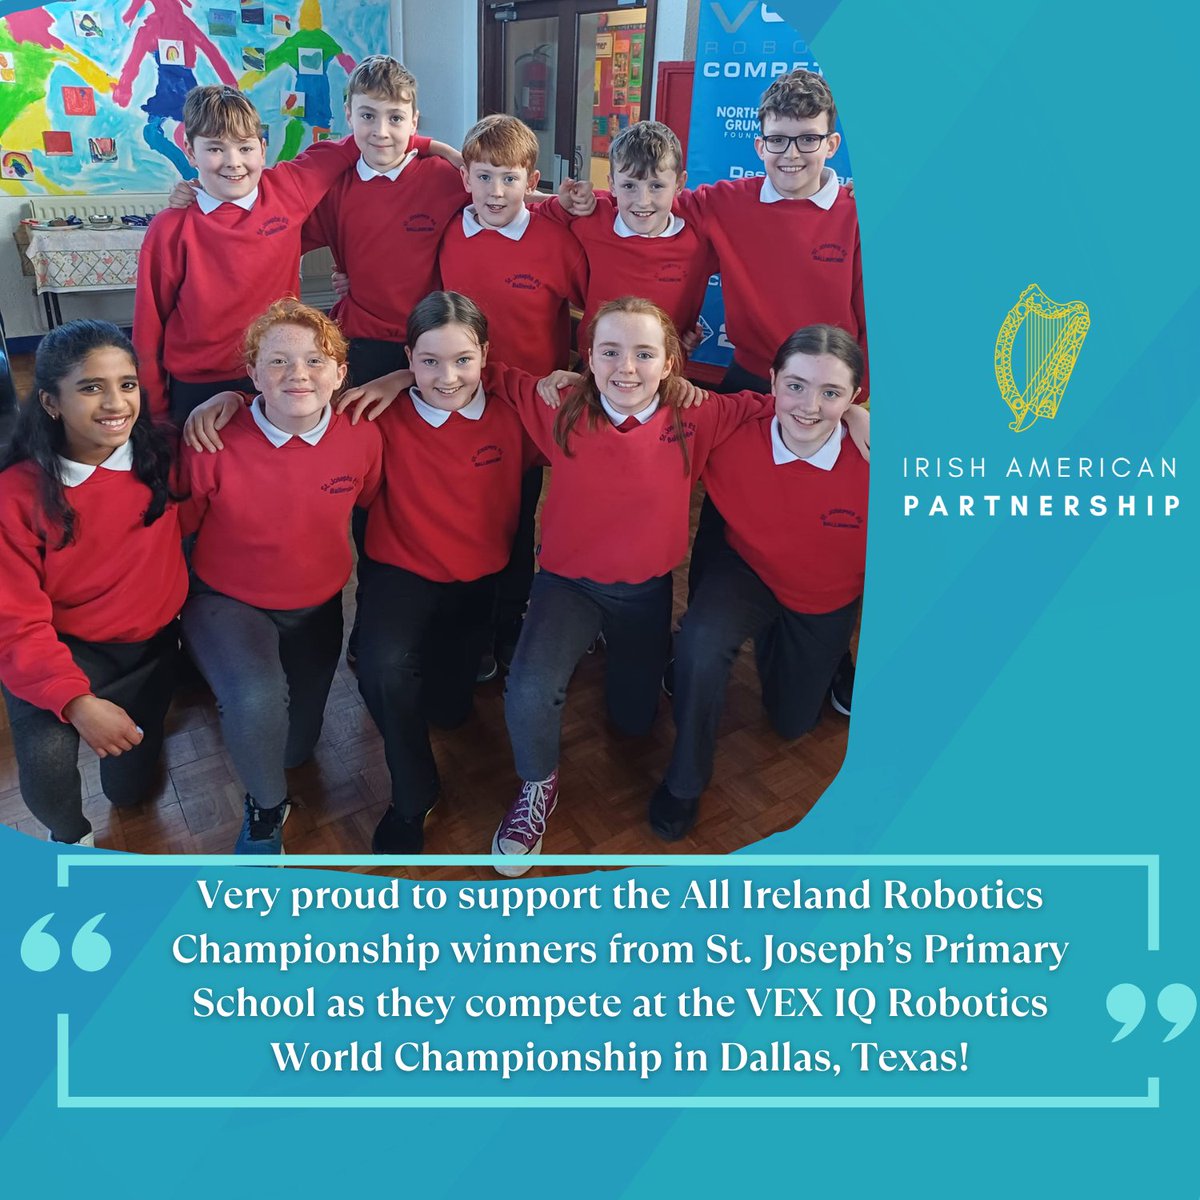 Having won the All-Ireland Championship at @MTU_ie, the Robotics team from St. Joseph’s Primary School are at the @vexrobotics IQ World Championships in Dallas! 👏 @Irishaporg are proud to support these young STEM enthusiasts & wish them the very best! 🇺🇸🇮🇪 #VEXWorlds #Education